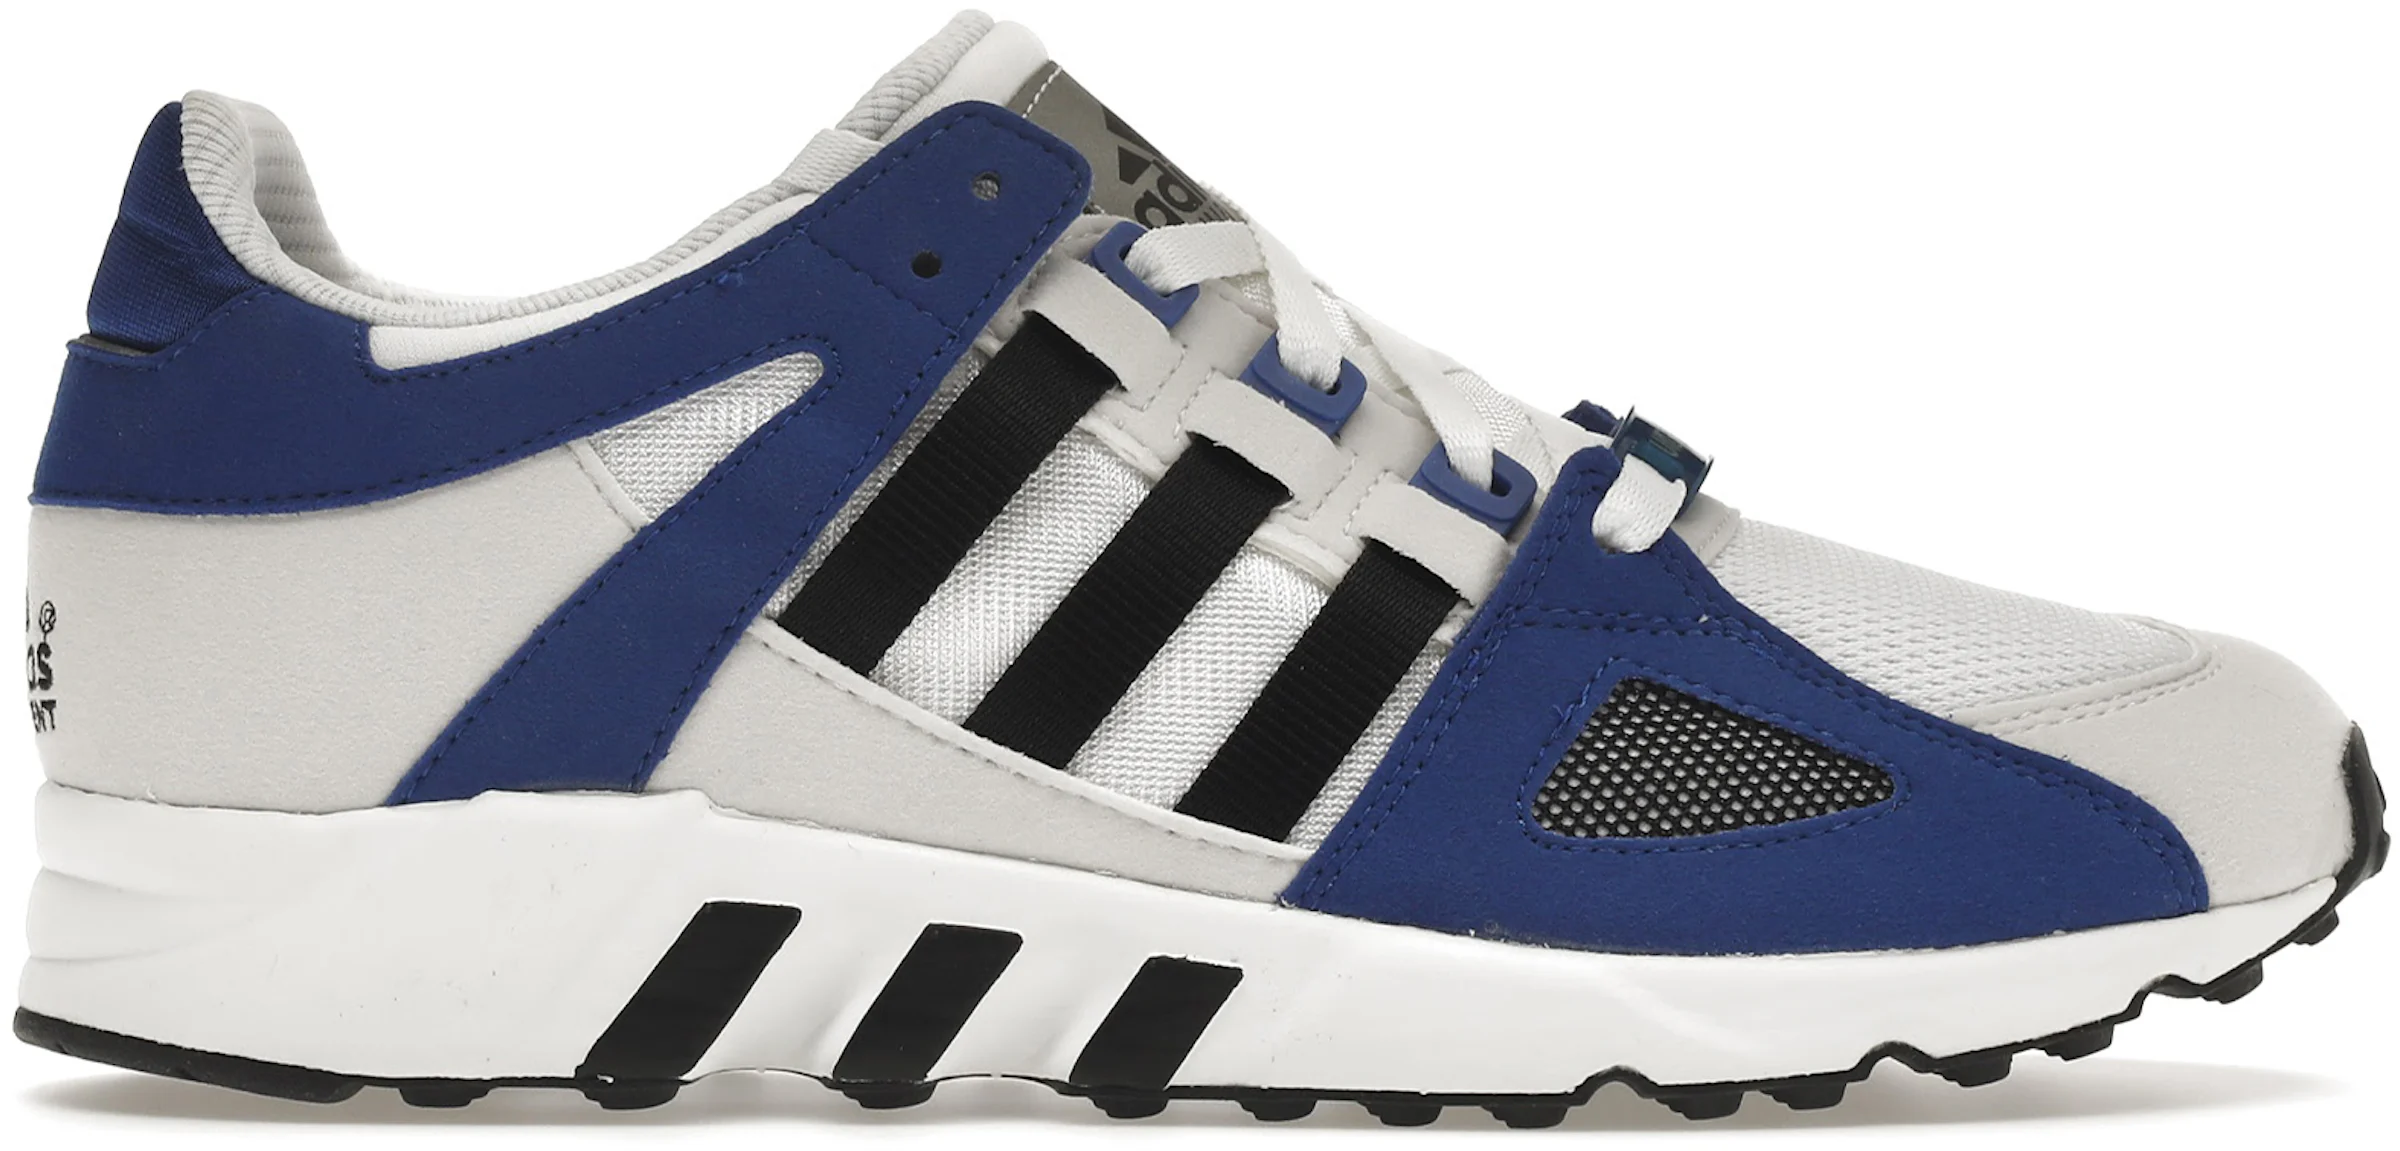 https://images.stockx.com/images/adidas-Equipment-Running-Guidance-93-White-Black-Royal-Blue-Product.jpg?fit=fill&bg=FFFFFF&w=1200&h=857&fm=webp&auto=compress&dpr=2&trim=color&updated_at=1652375041&q=60